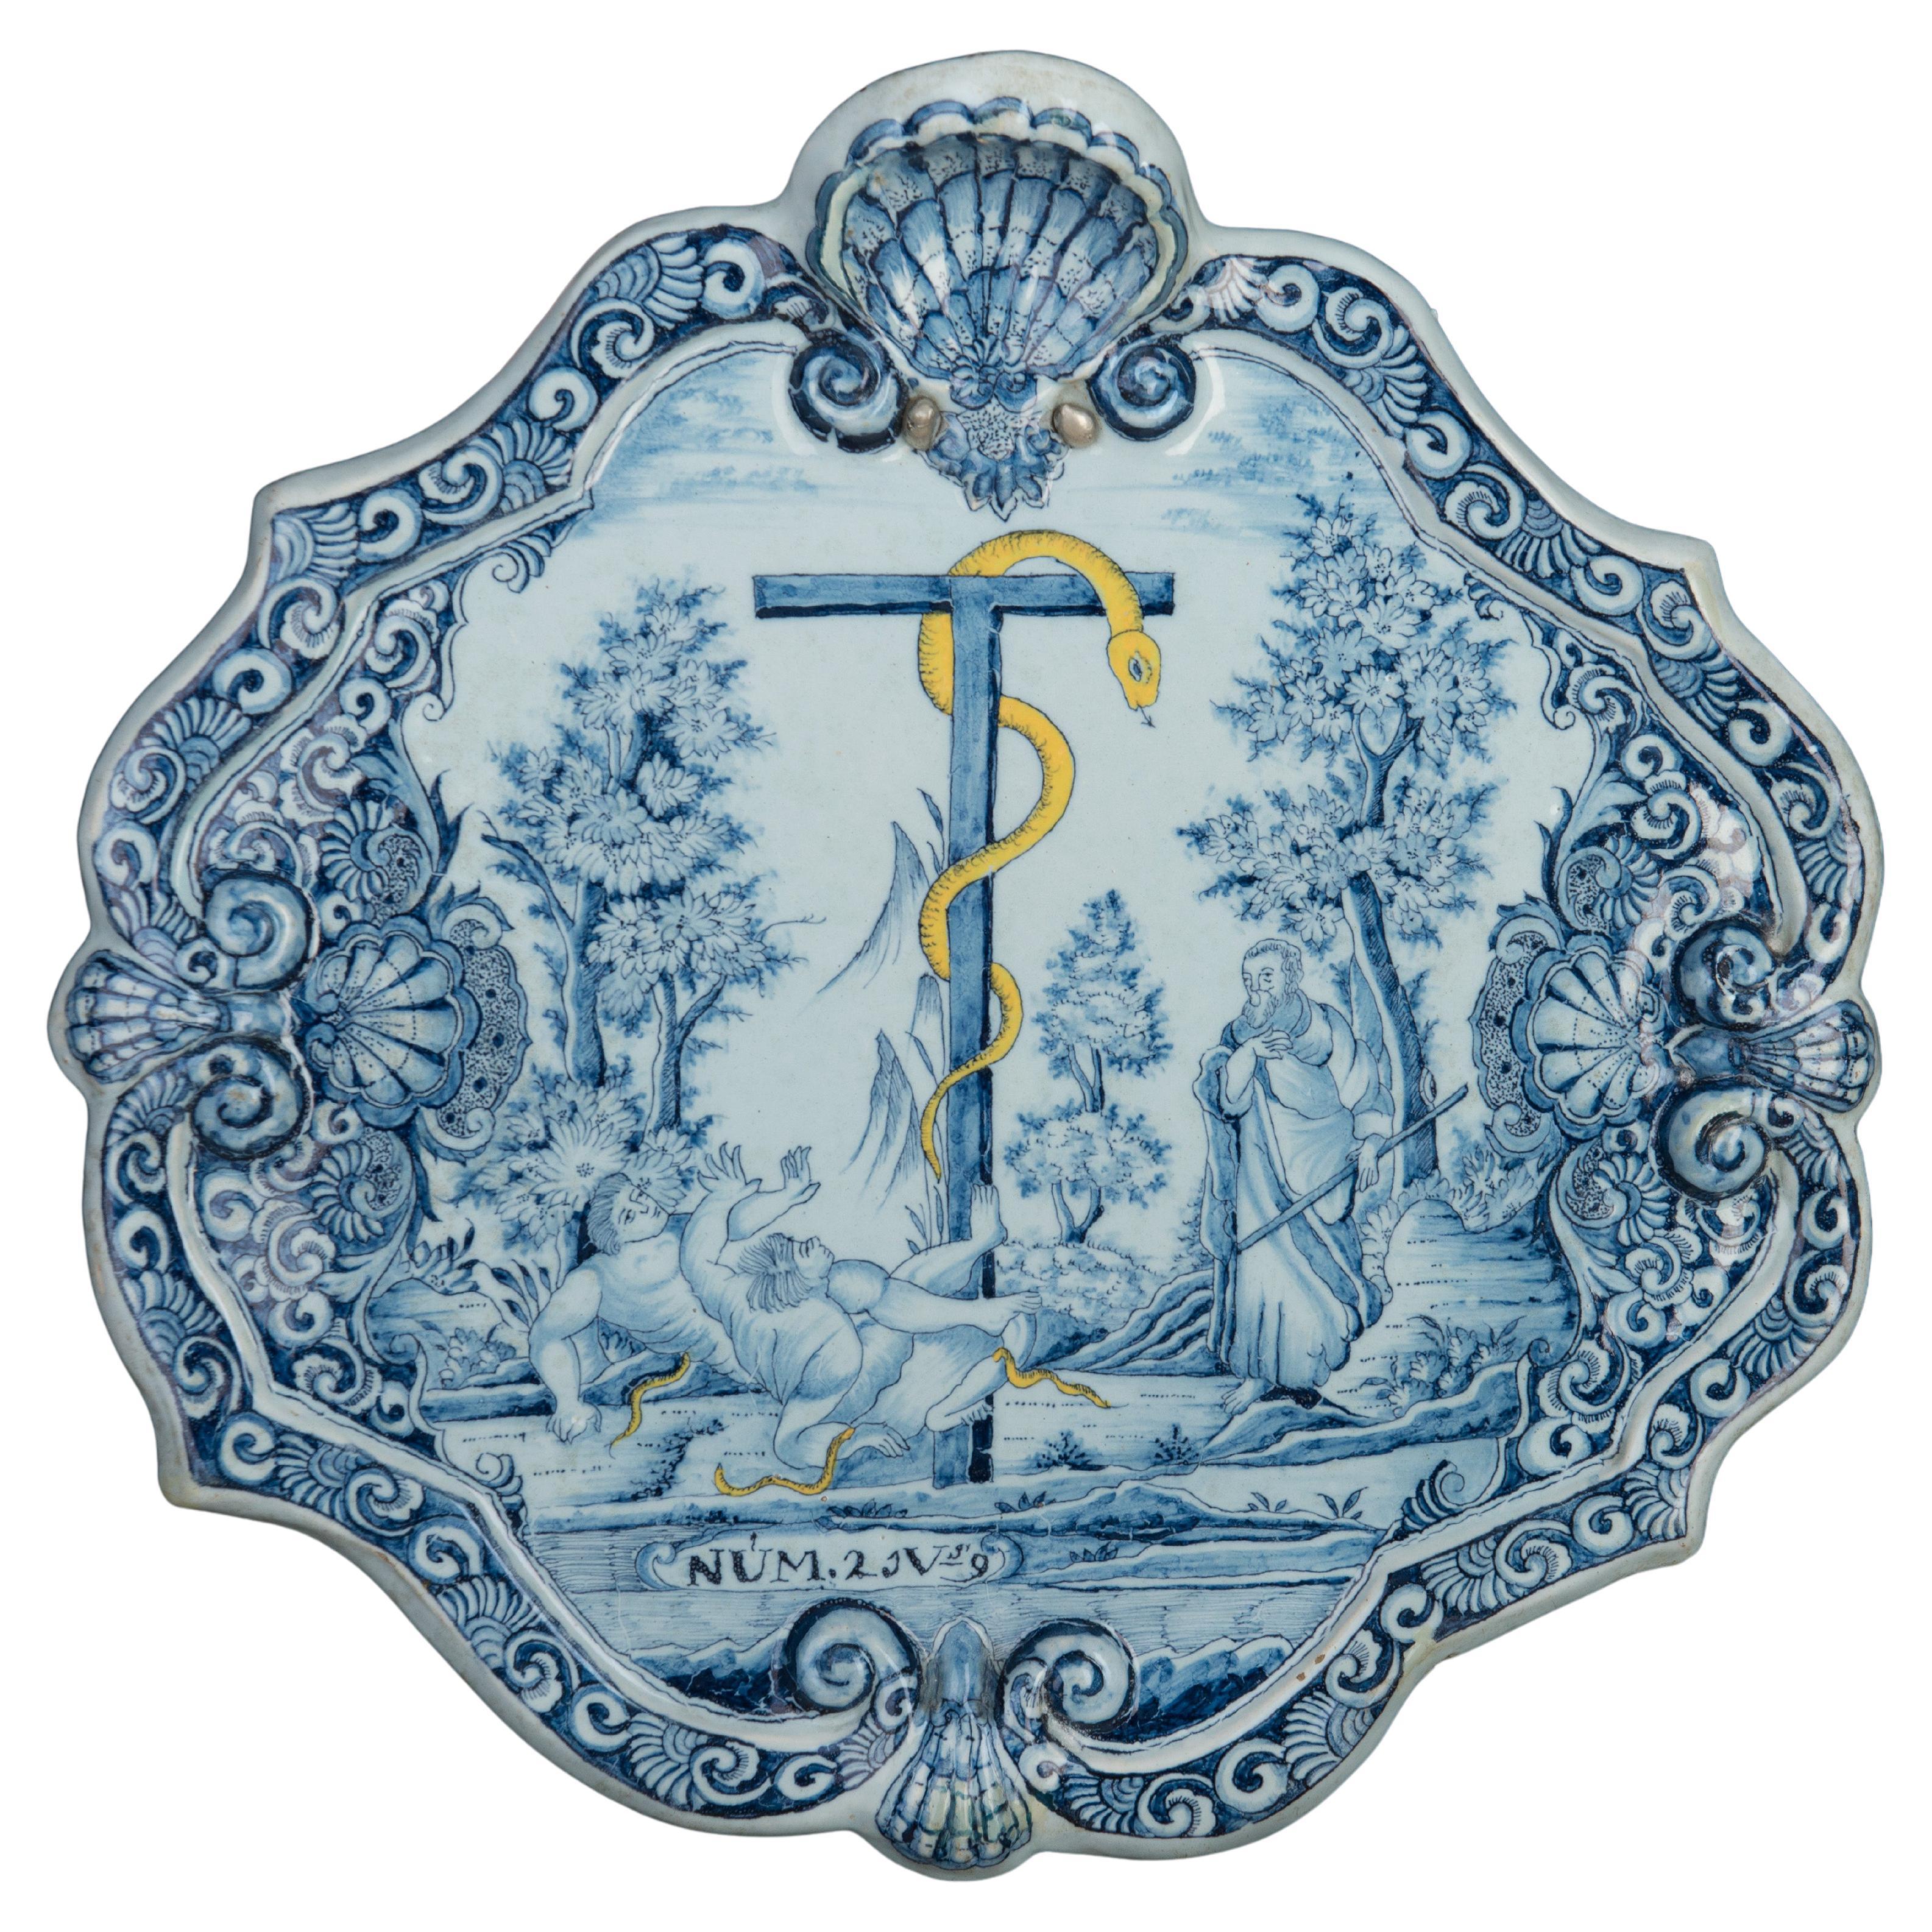 Dutch Delft, 1740-1760, Biblical ceramic Plaque with Moses and the Bronze Snake